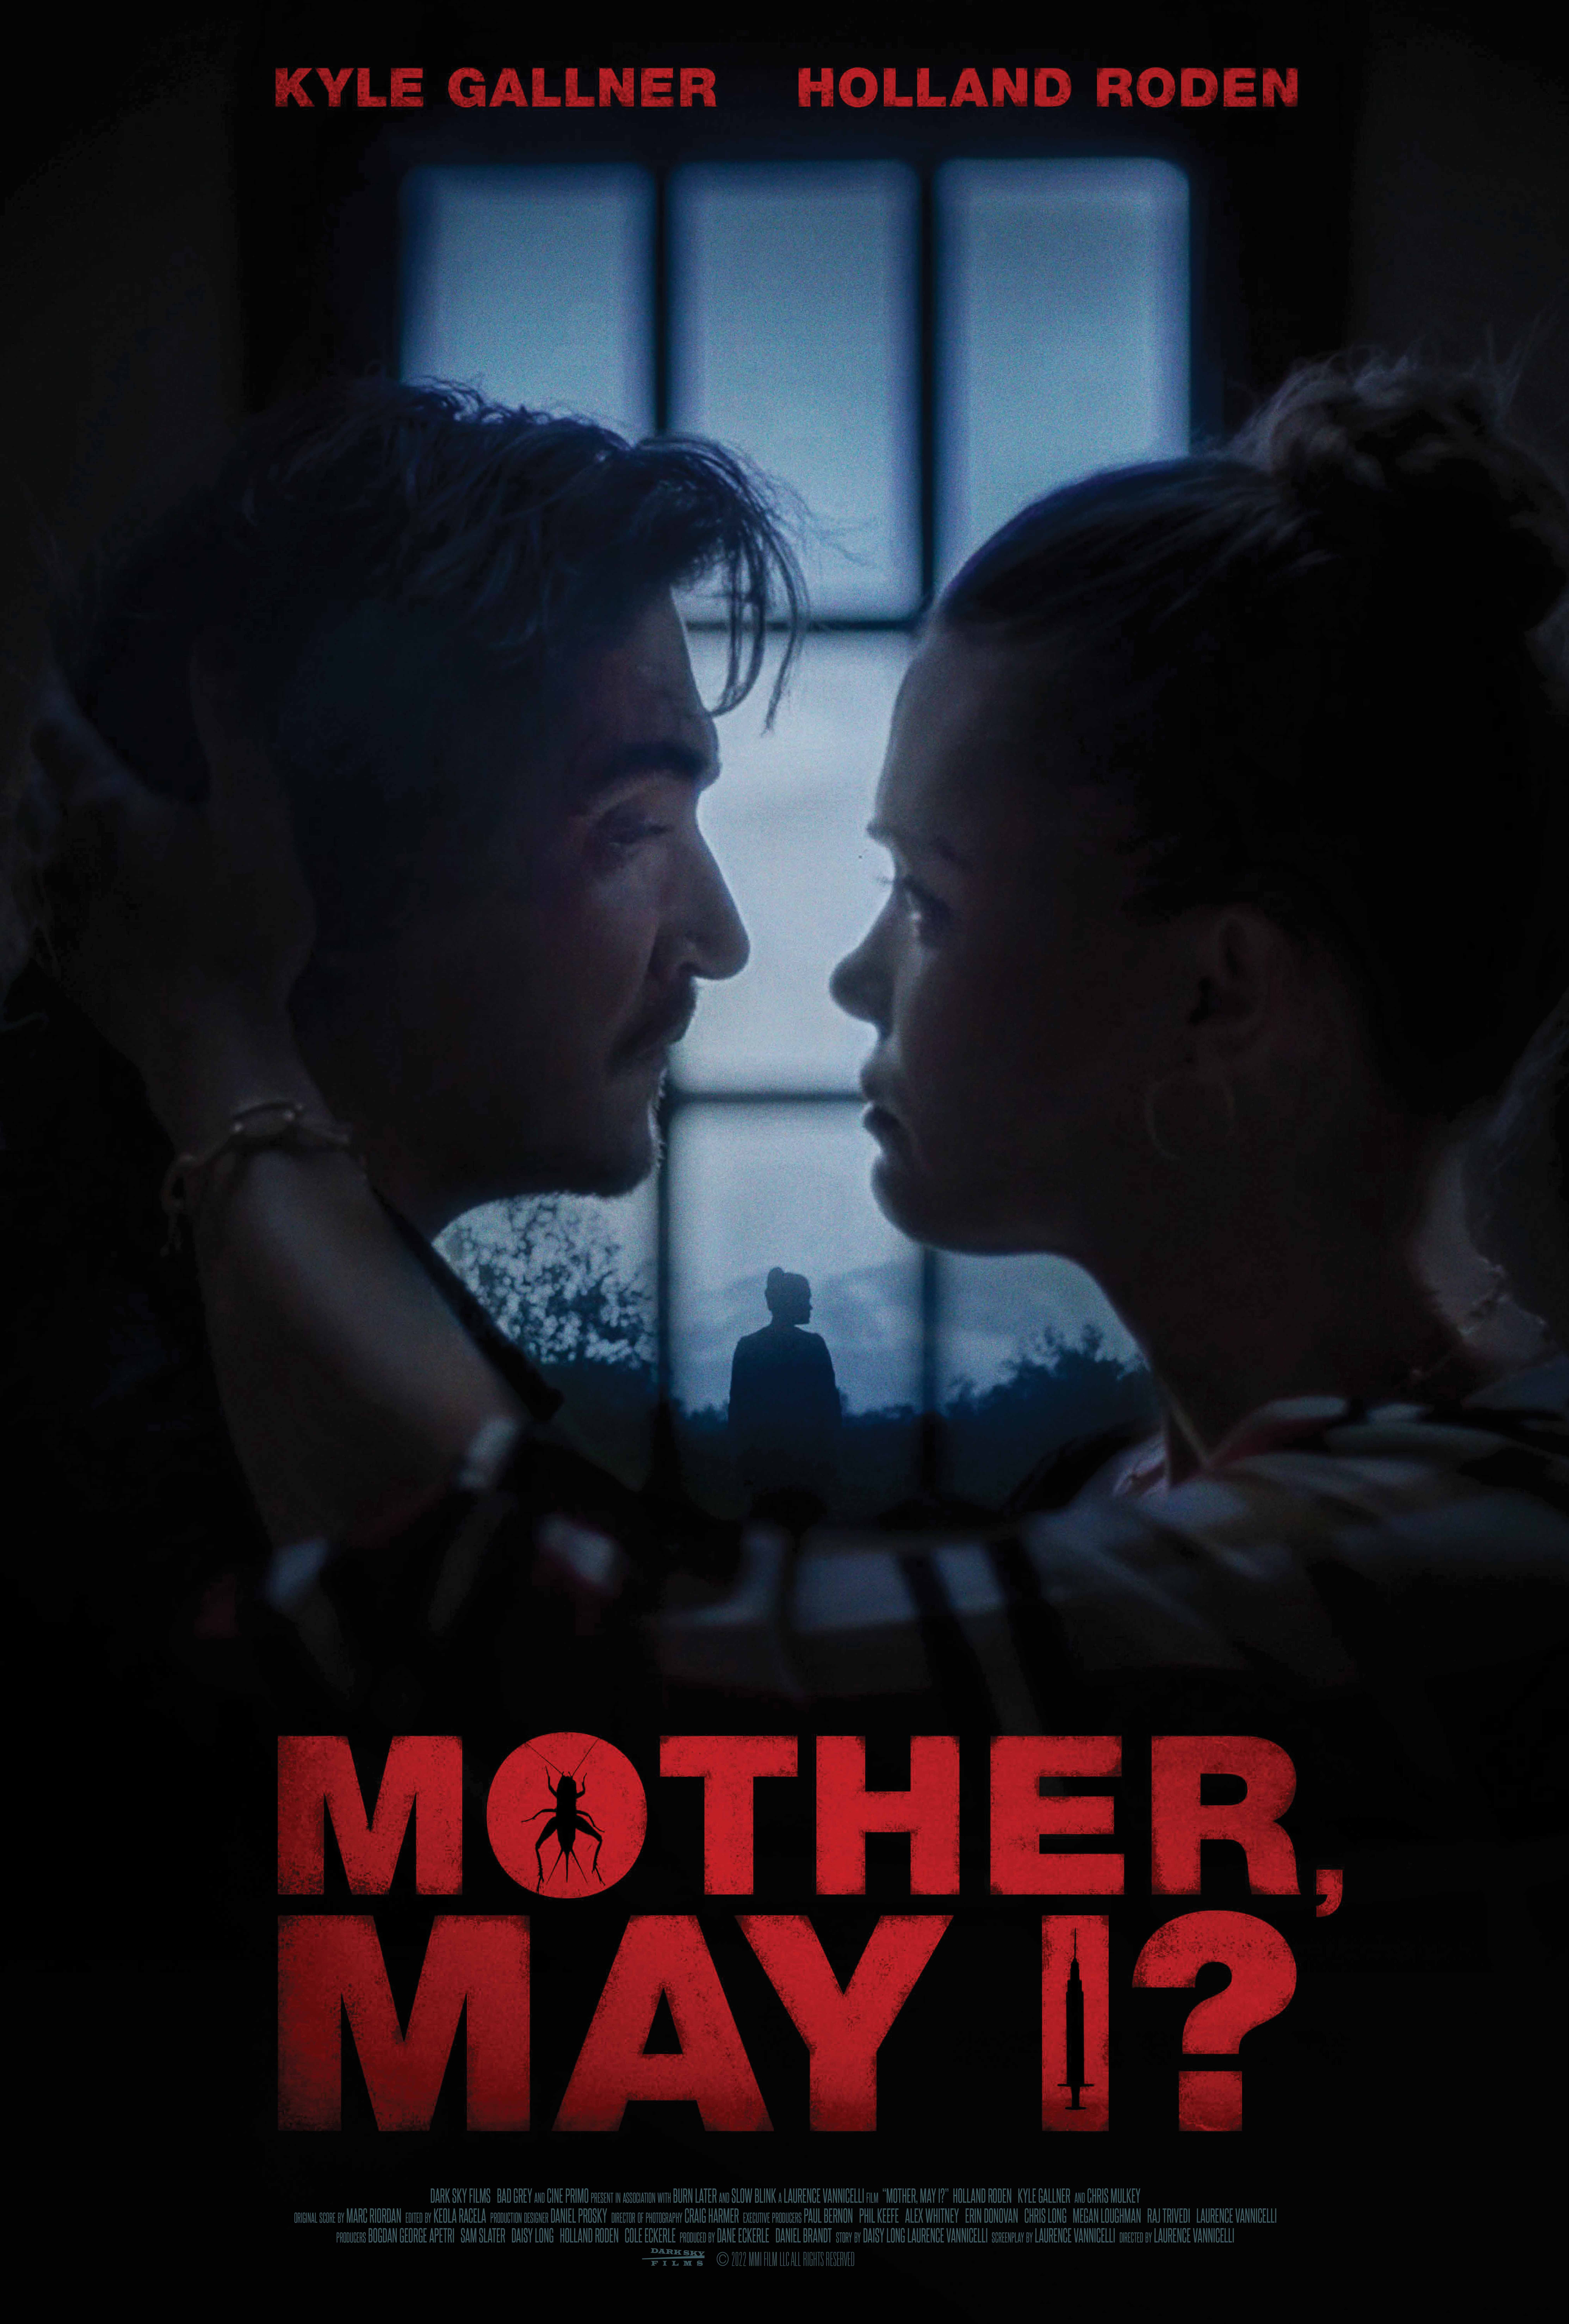 "Mother, May I?" - A Riveting Psychological Thriller Featuring Kyle Gallner and Holland Roden Set to Hit Theaters and VOD on July 21st 47